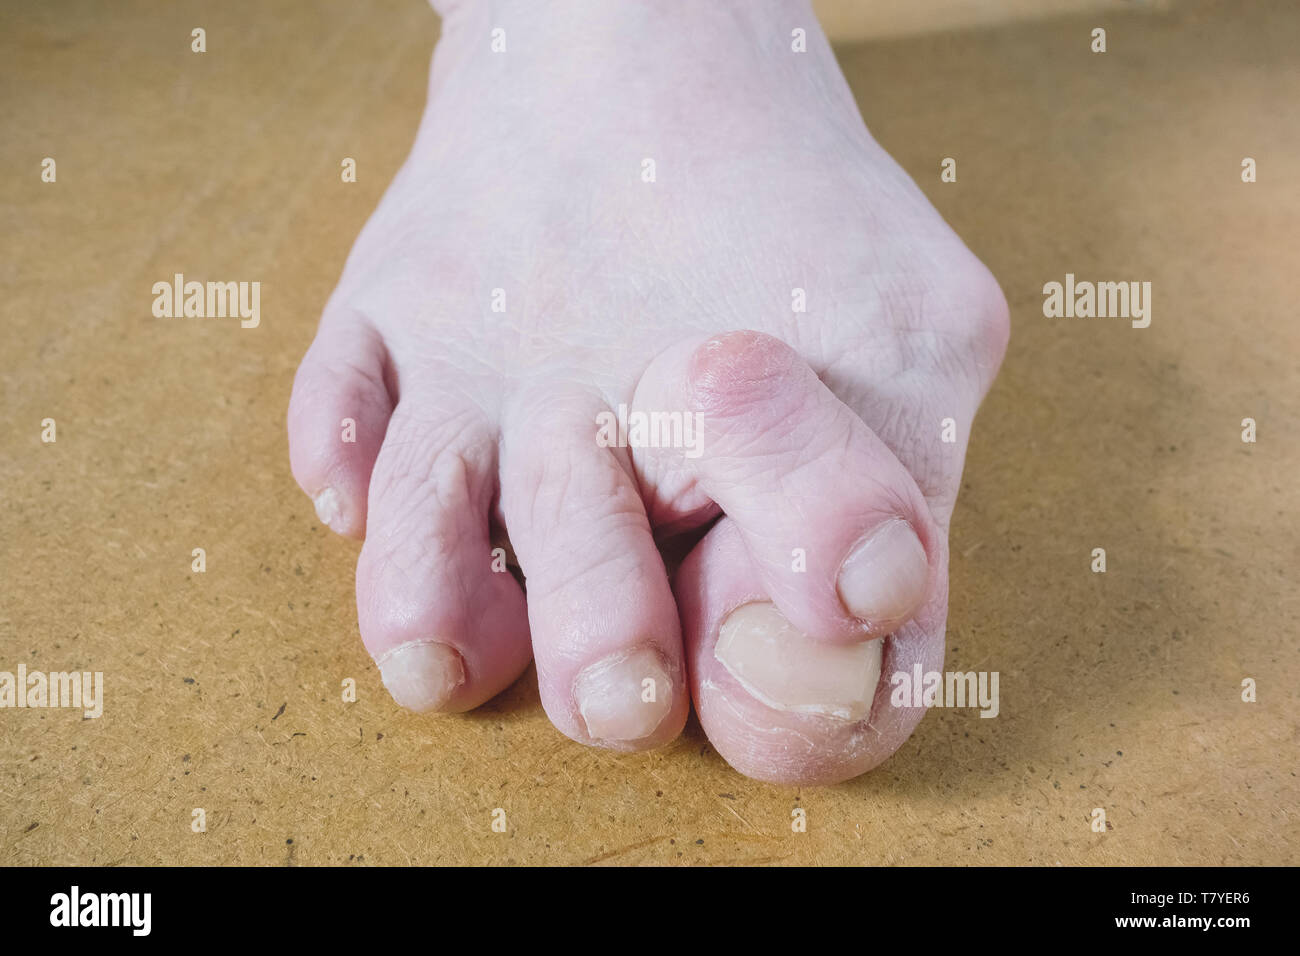 Valgus Deformity of Female Leg Due Hallux Valgus and Weakness of Ligaments. Stock Photo